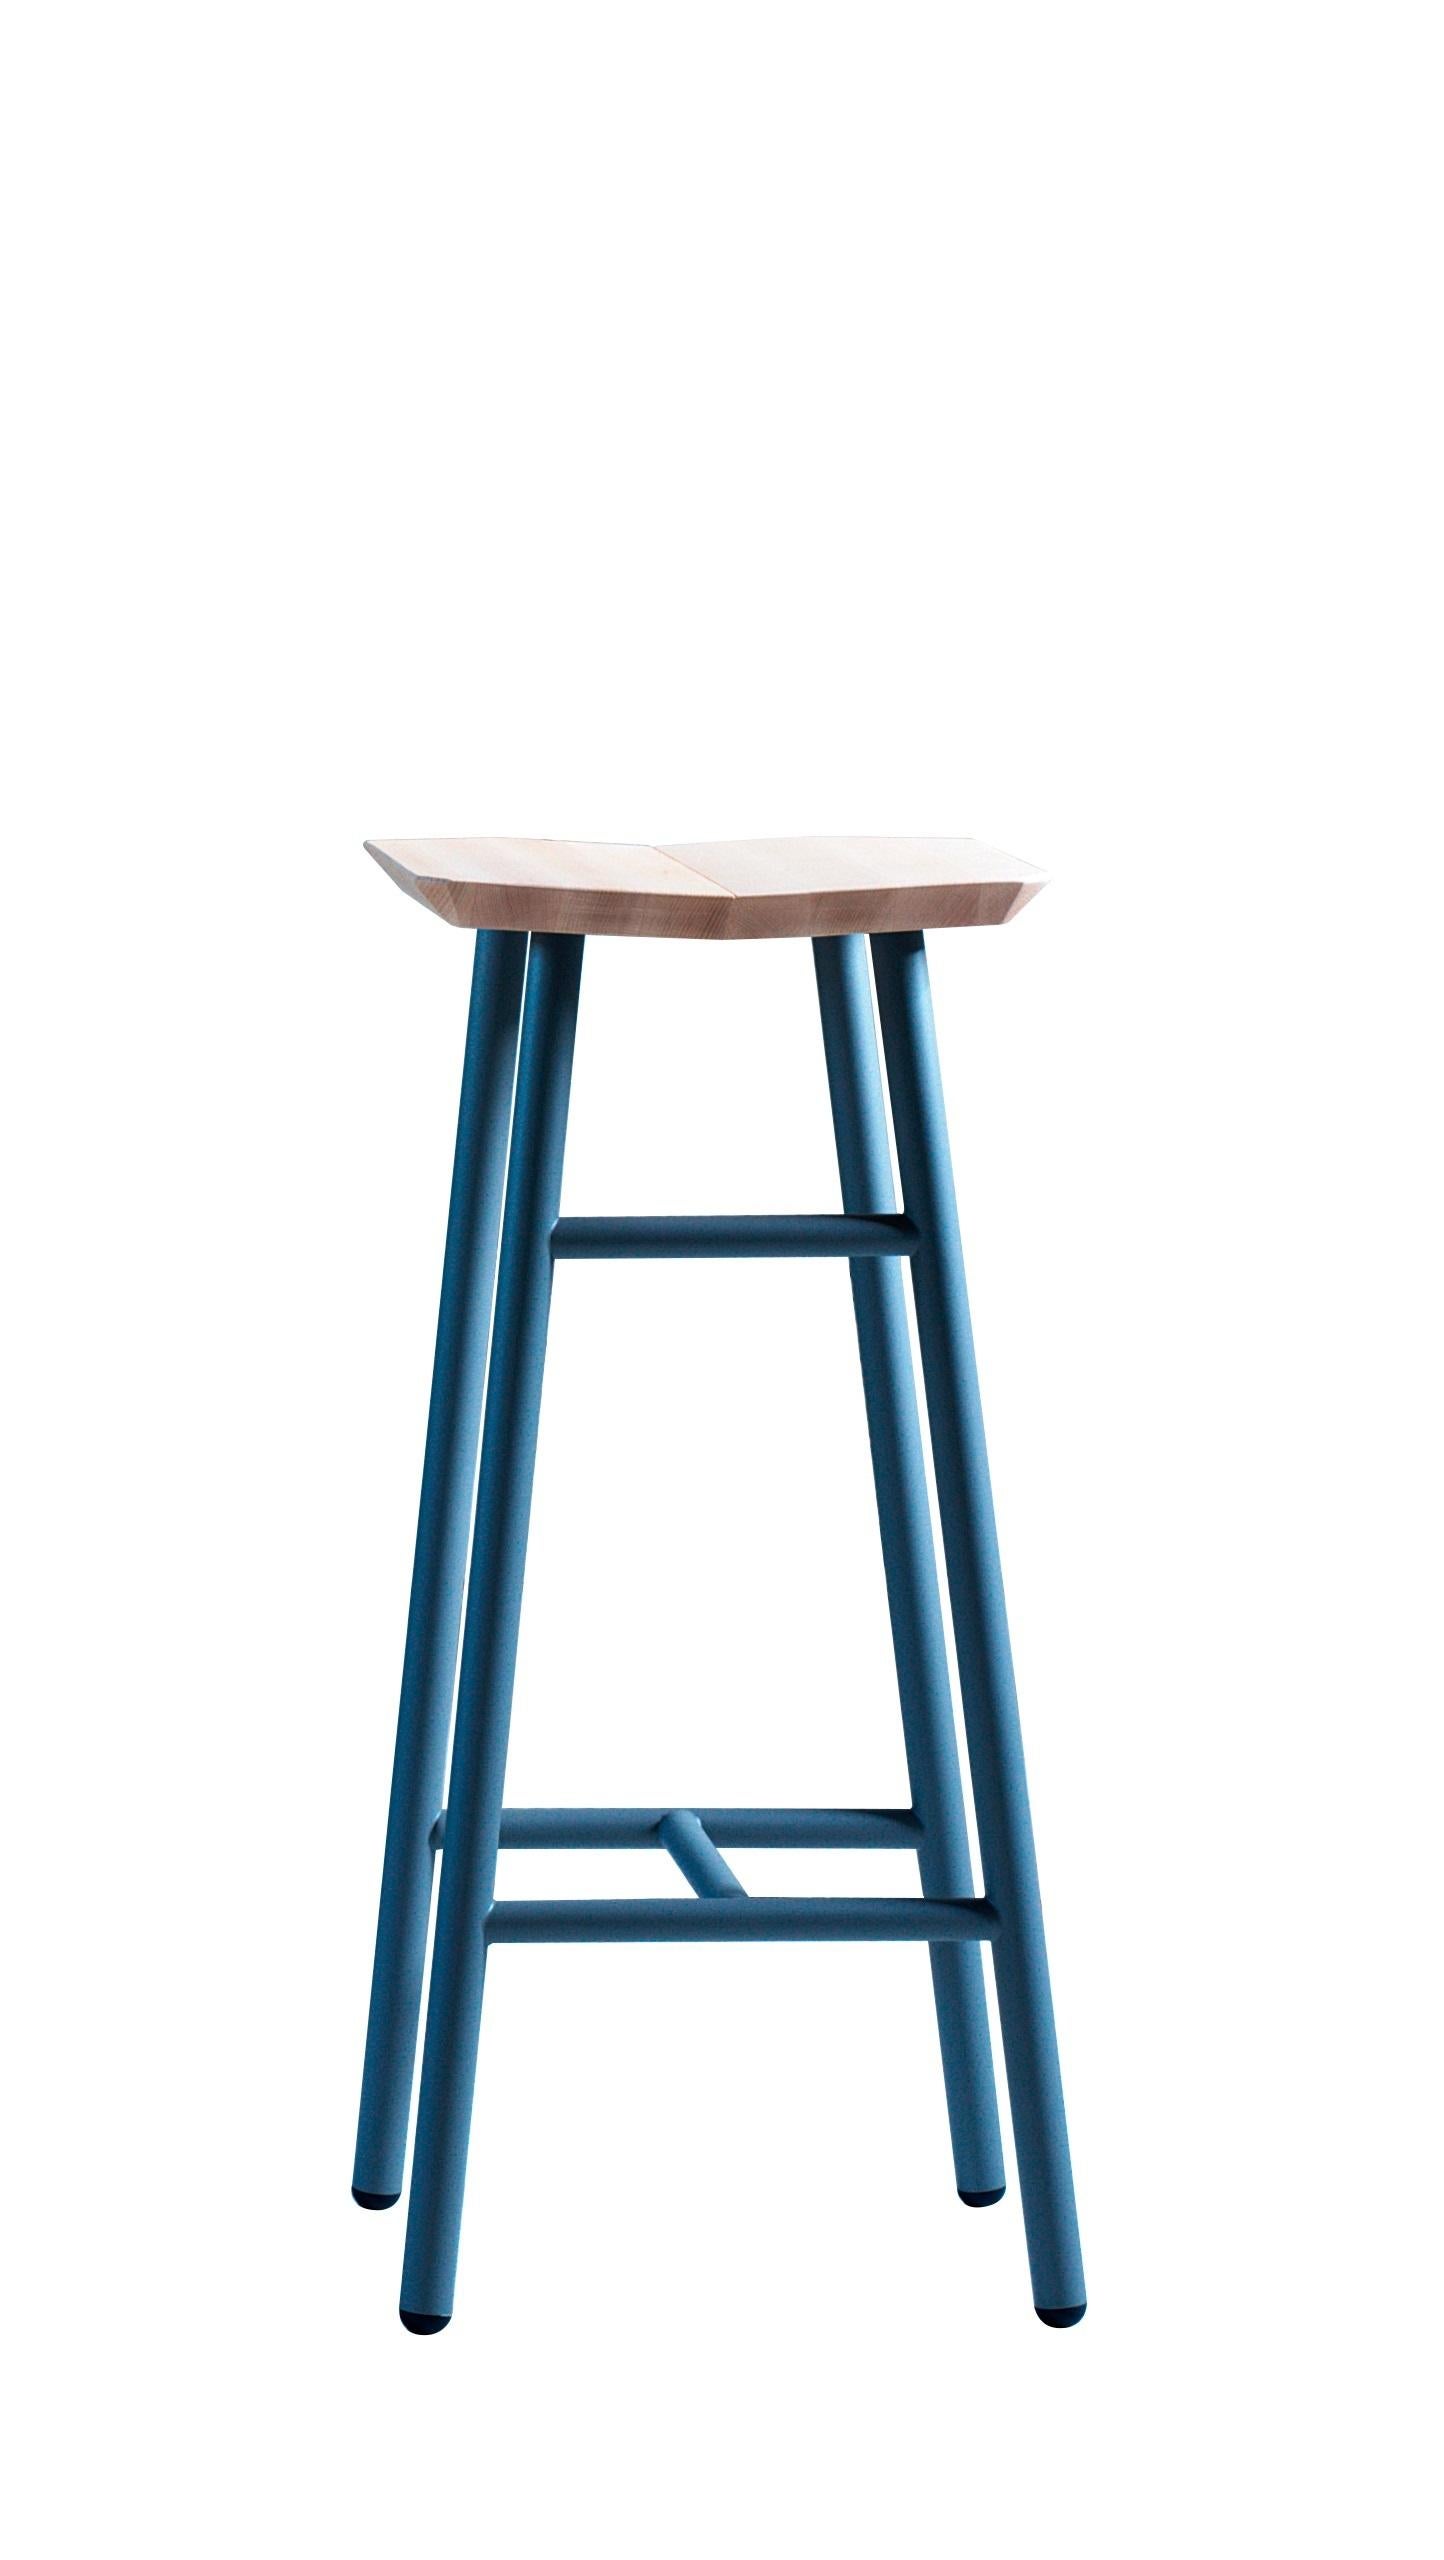 For Sale: Blue (Intense Blue Lacquer) Dedo High Stool in Steel Lacquer Legs, Wooden Seat, by Miniforms Lab